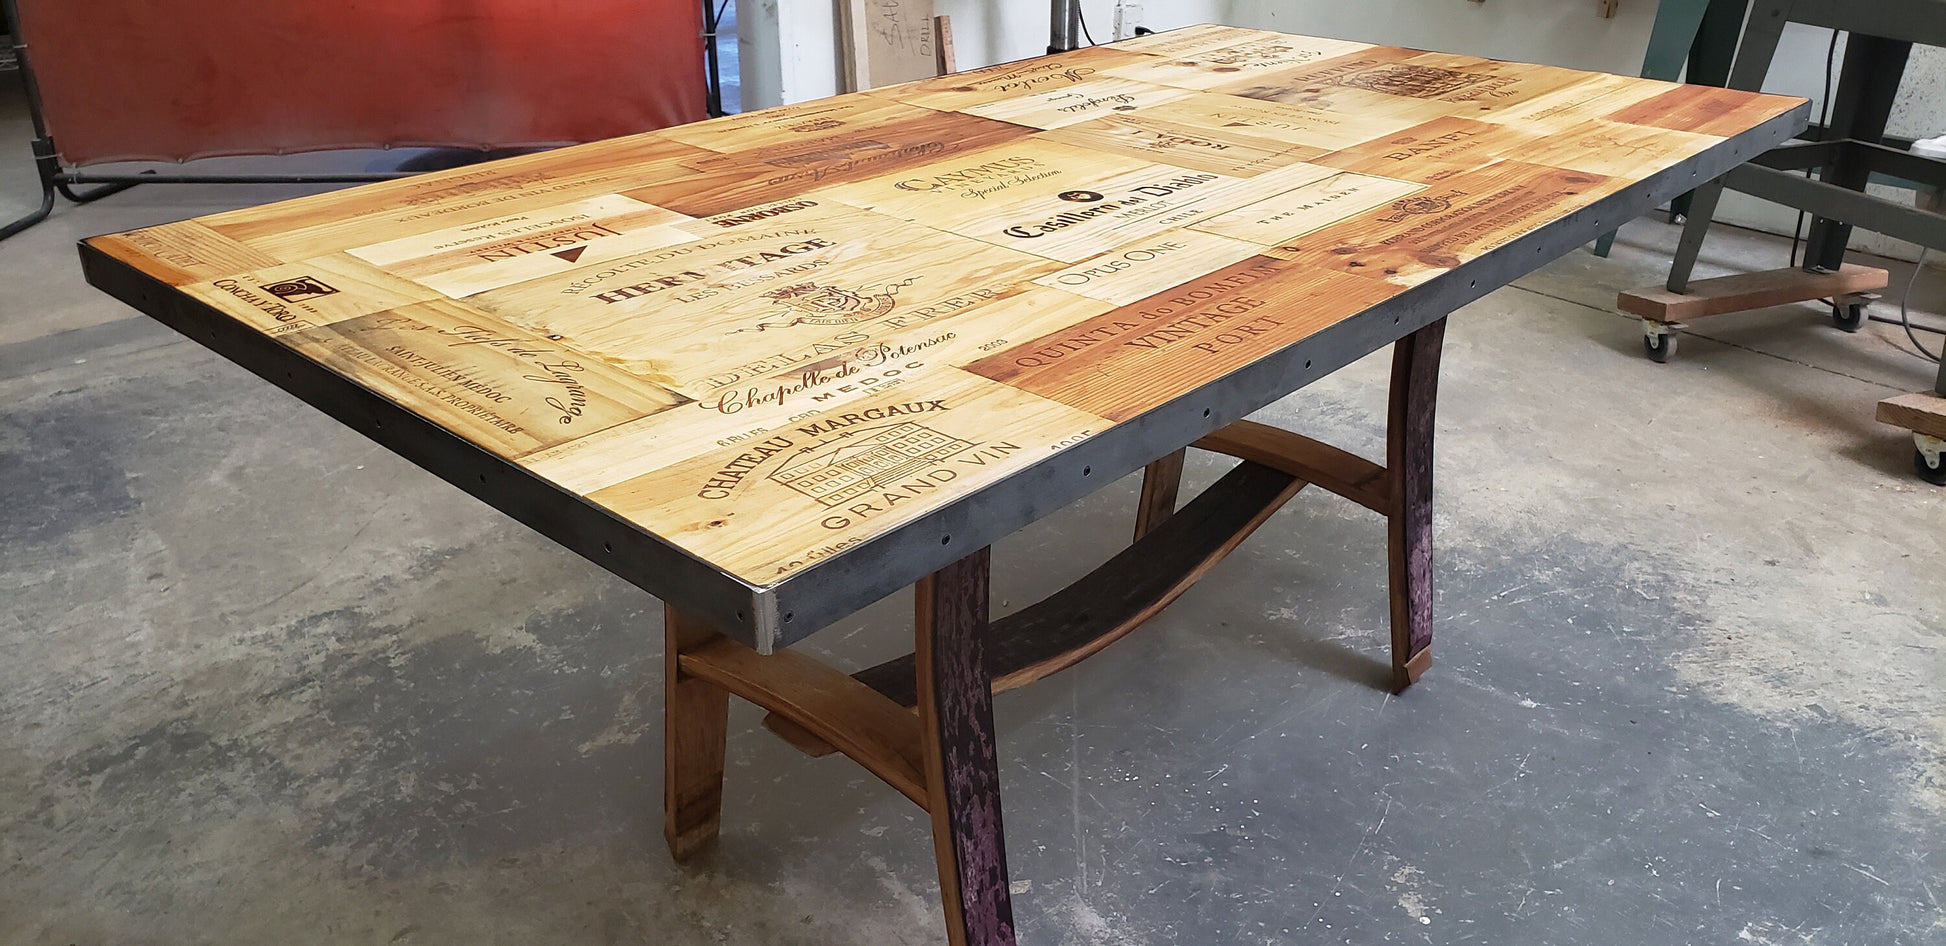 Wine Crate Dining Table - Tafla - Made from reclaimed wine barrels + wine crates 100% Recycled!